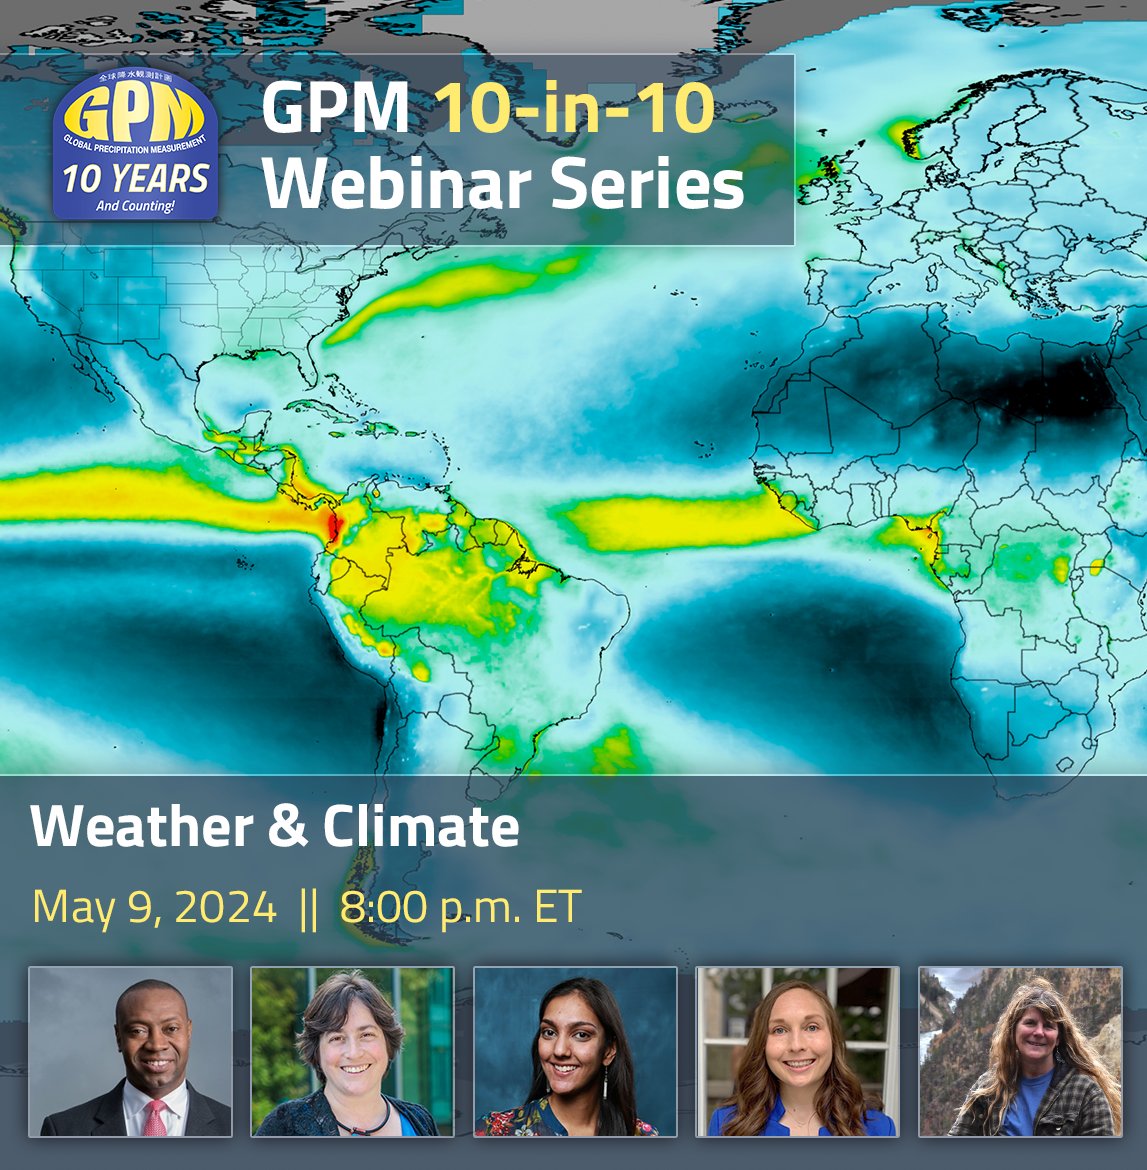 Join us on Thurs. May 9, 8pm ET, for a free webinar exploring Earth's weather and climate and how satellites like GPM help us monitor precipitation trends over time. Guest speakers include @DrShepherd2013 and @KashaPatel

Register here: go.nasa.gov/3U8VDE1